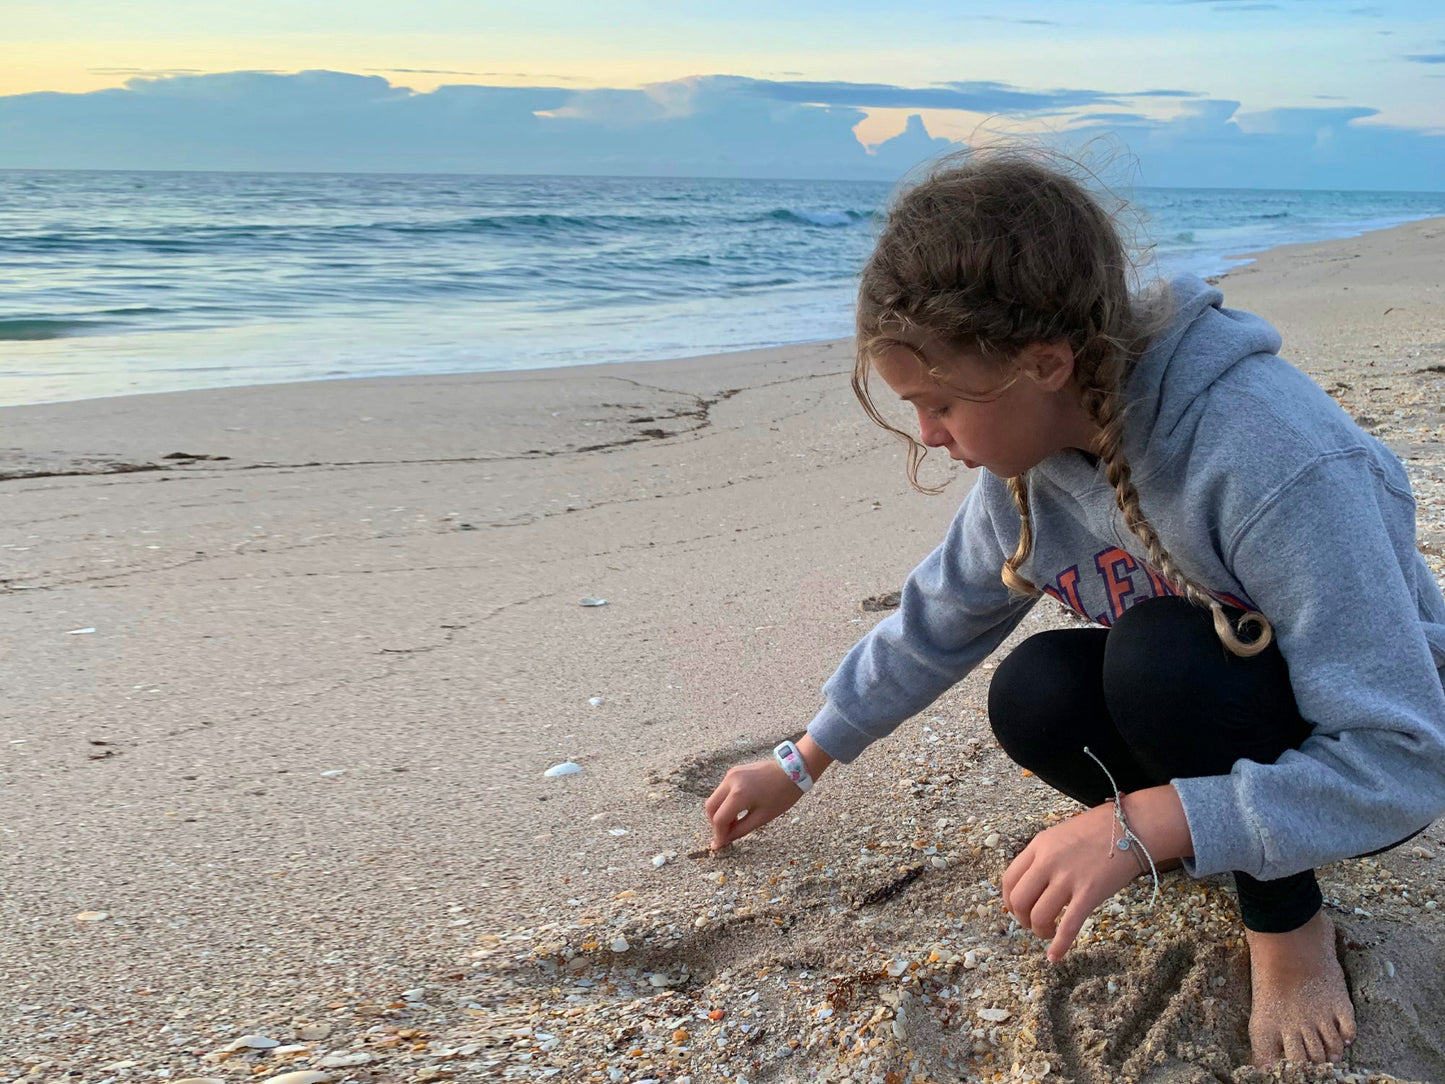 A young girl (the author's youngest daughter) sits at the beach—engrossed in the "art" she is creating in the sand as she draws with a shell. In the background, the sun sets over the ocean.